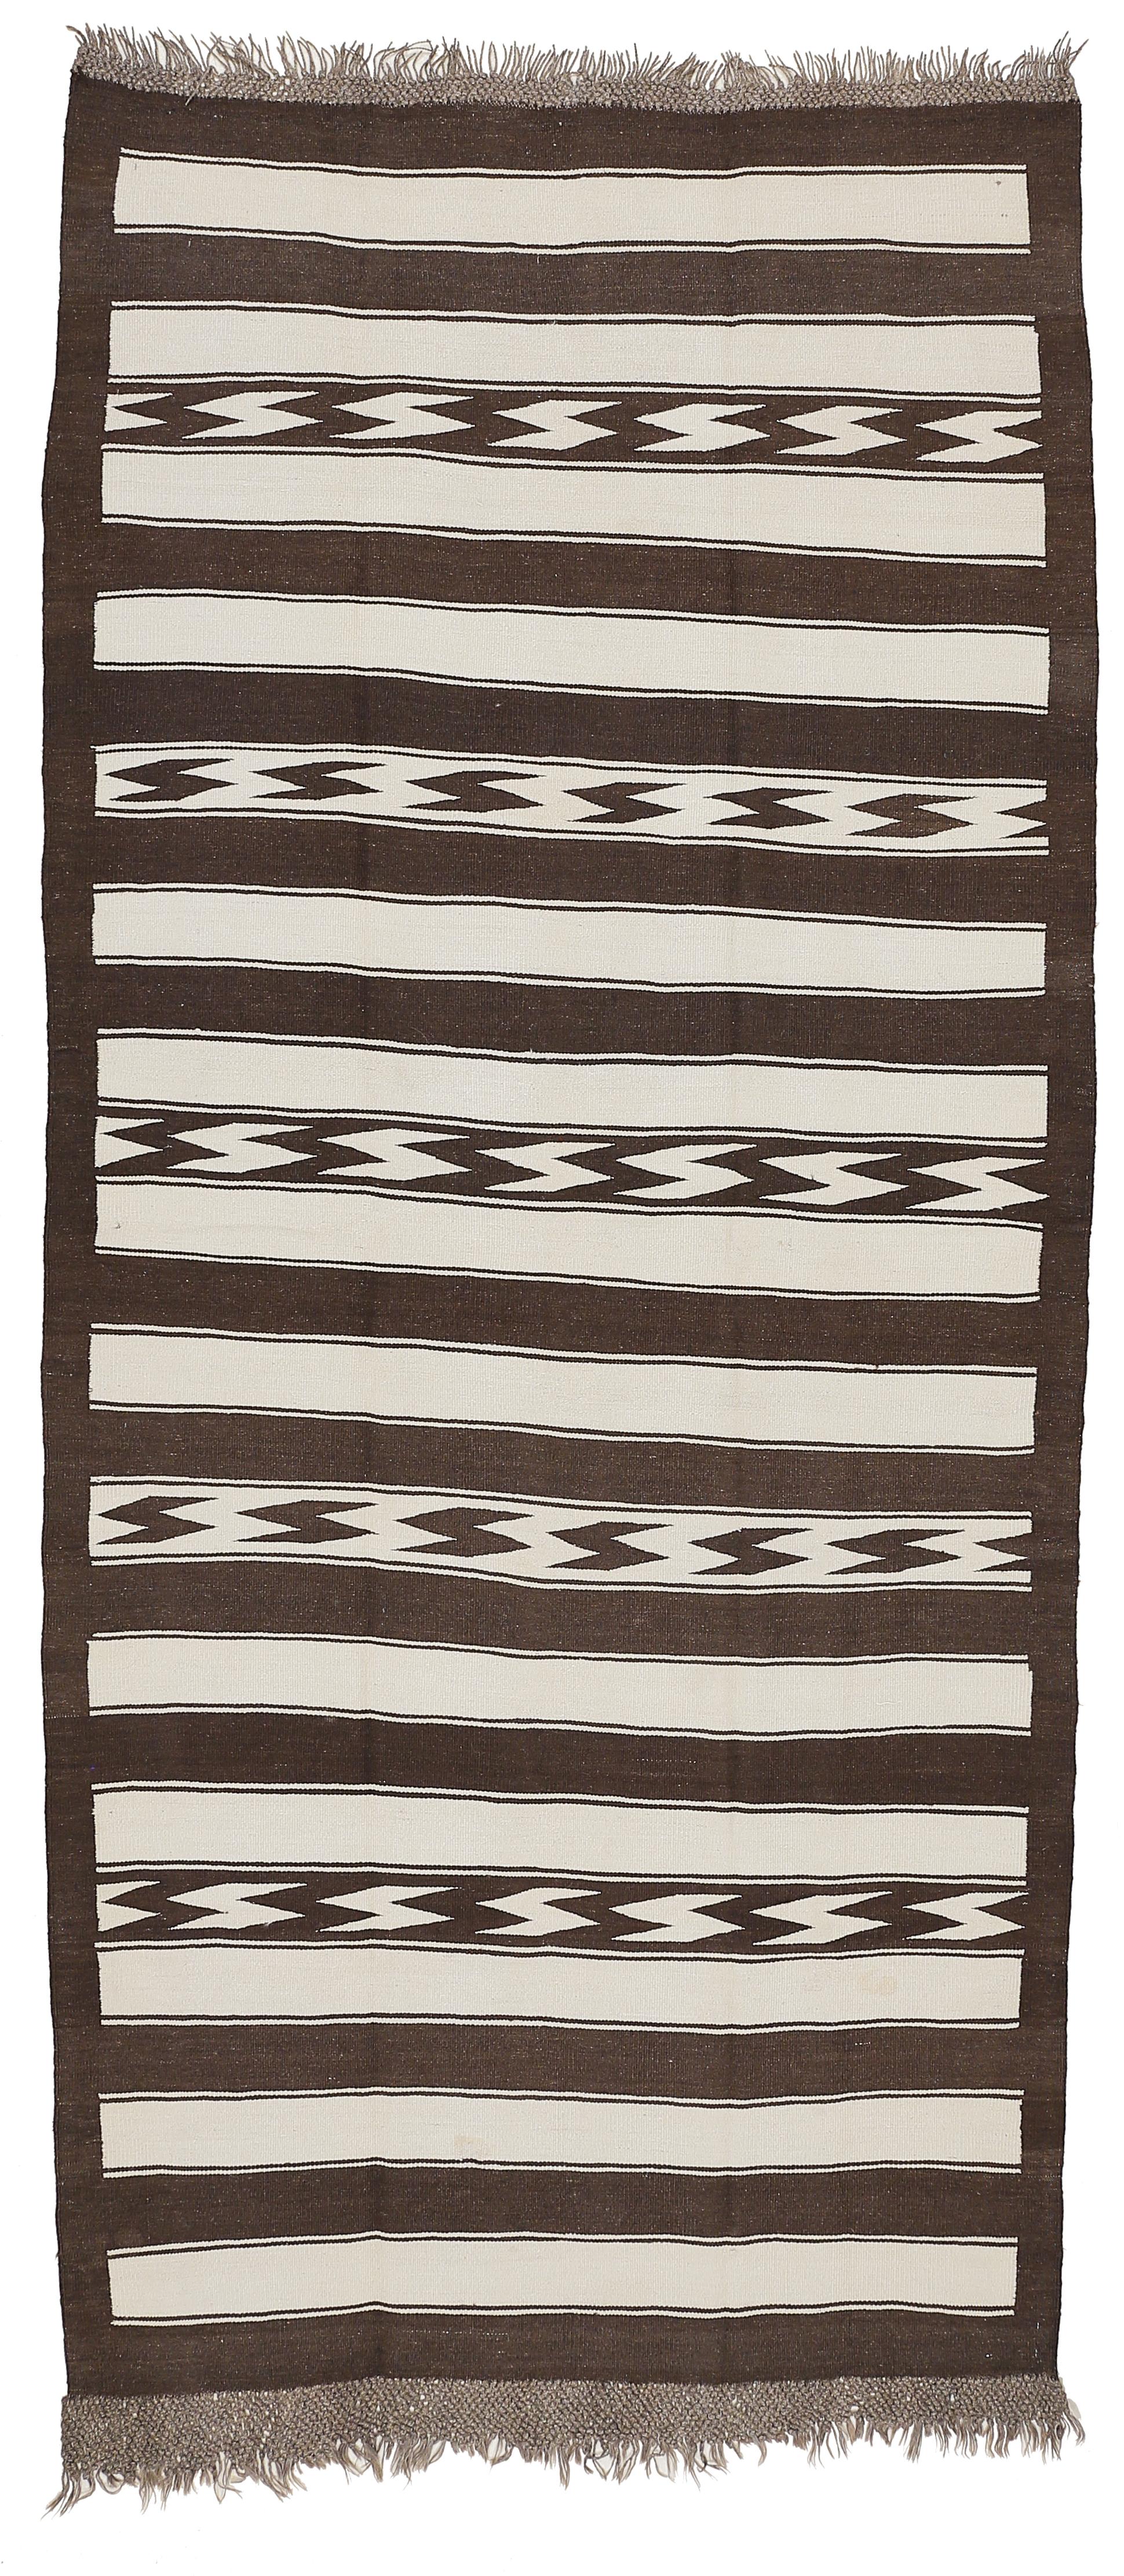 A rare flat-weave from the Uzbek tribes of Central Asia woven with natural, undyed wools with a pattern composed of horizontal dark brown stripes alternated at irregular intervals with an eye-dazzler, flame pattern.
This stunning, visual kilim is in